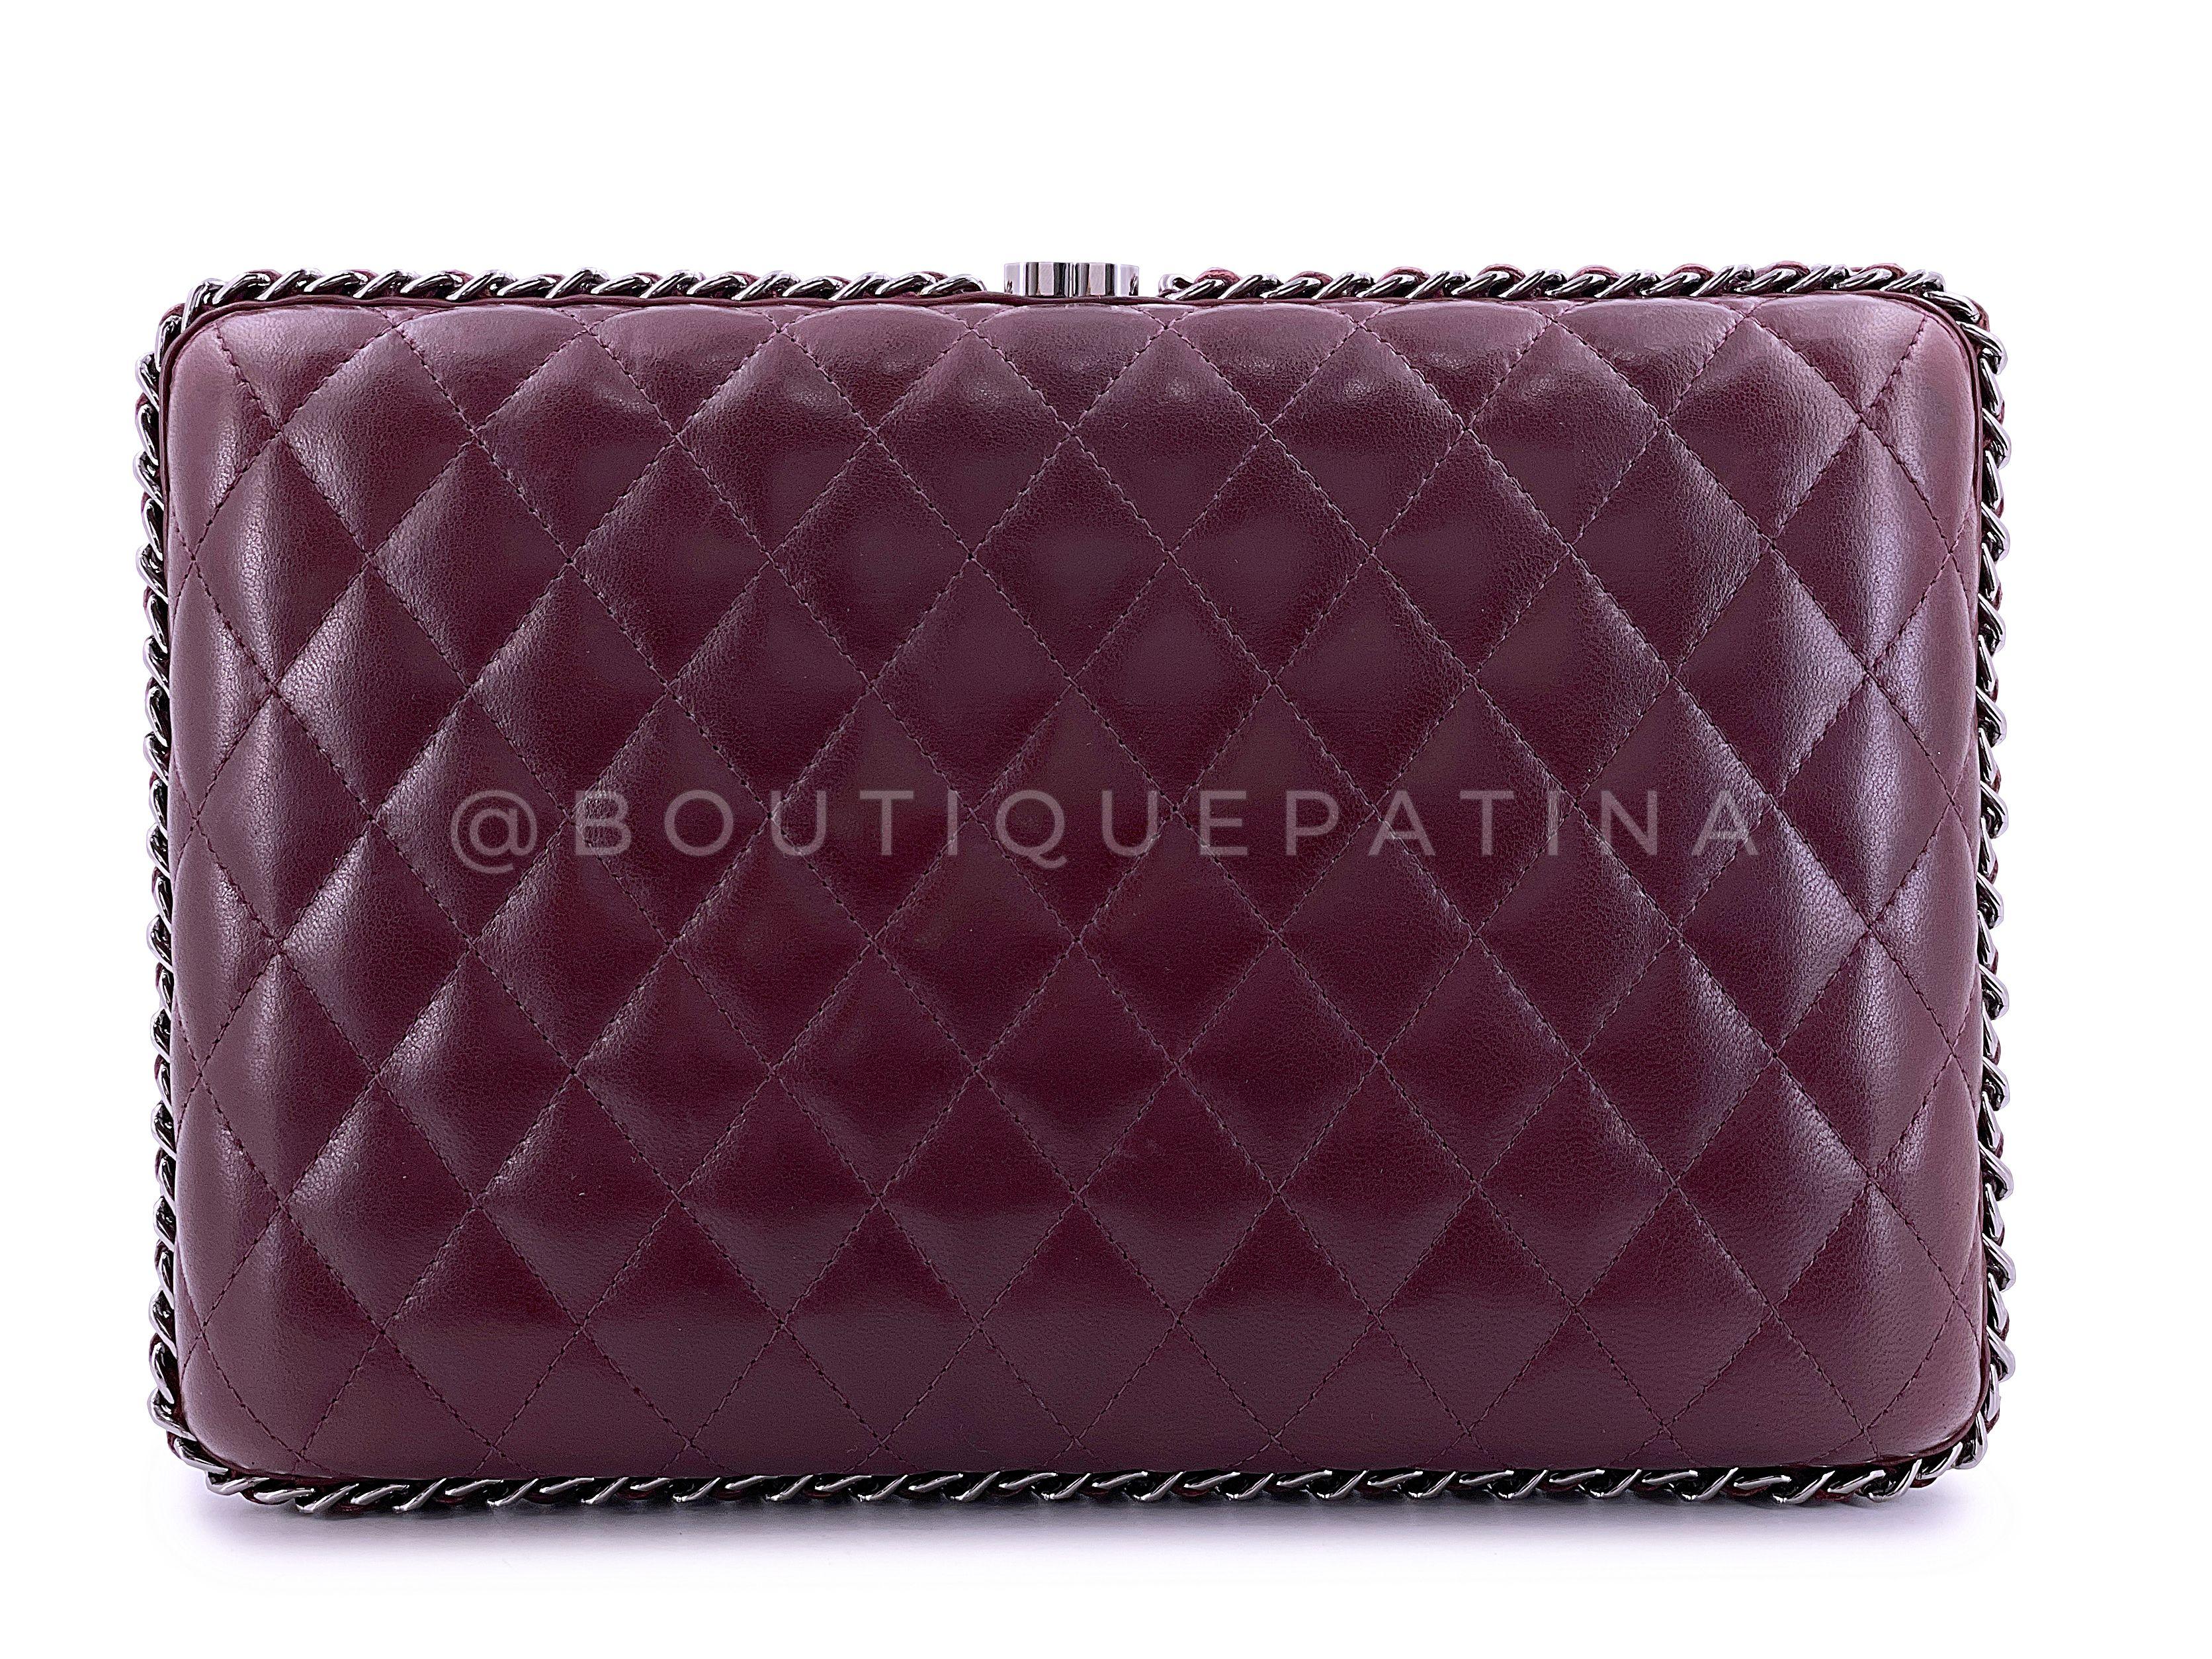 Chanel 2012 Bordeaux Oversized Hard Quilted Chain Around Clutch Bag RHW 67849 For Sale 1